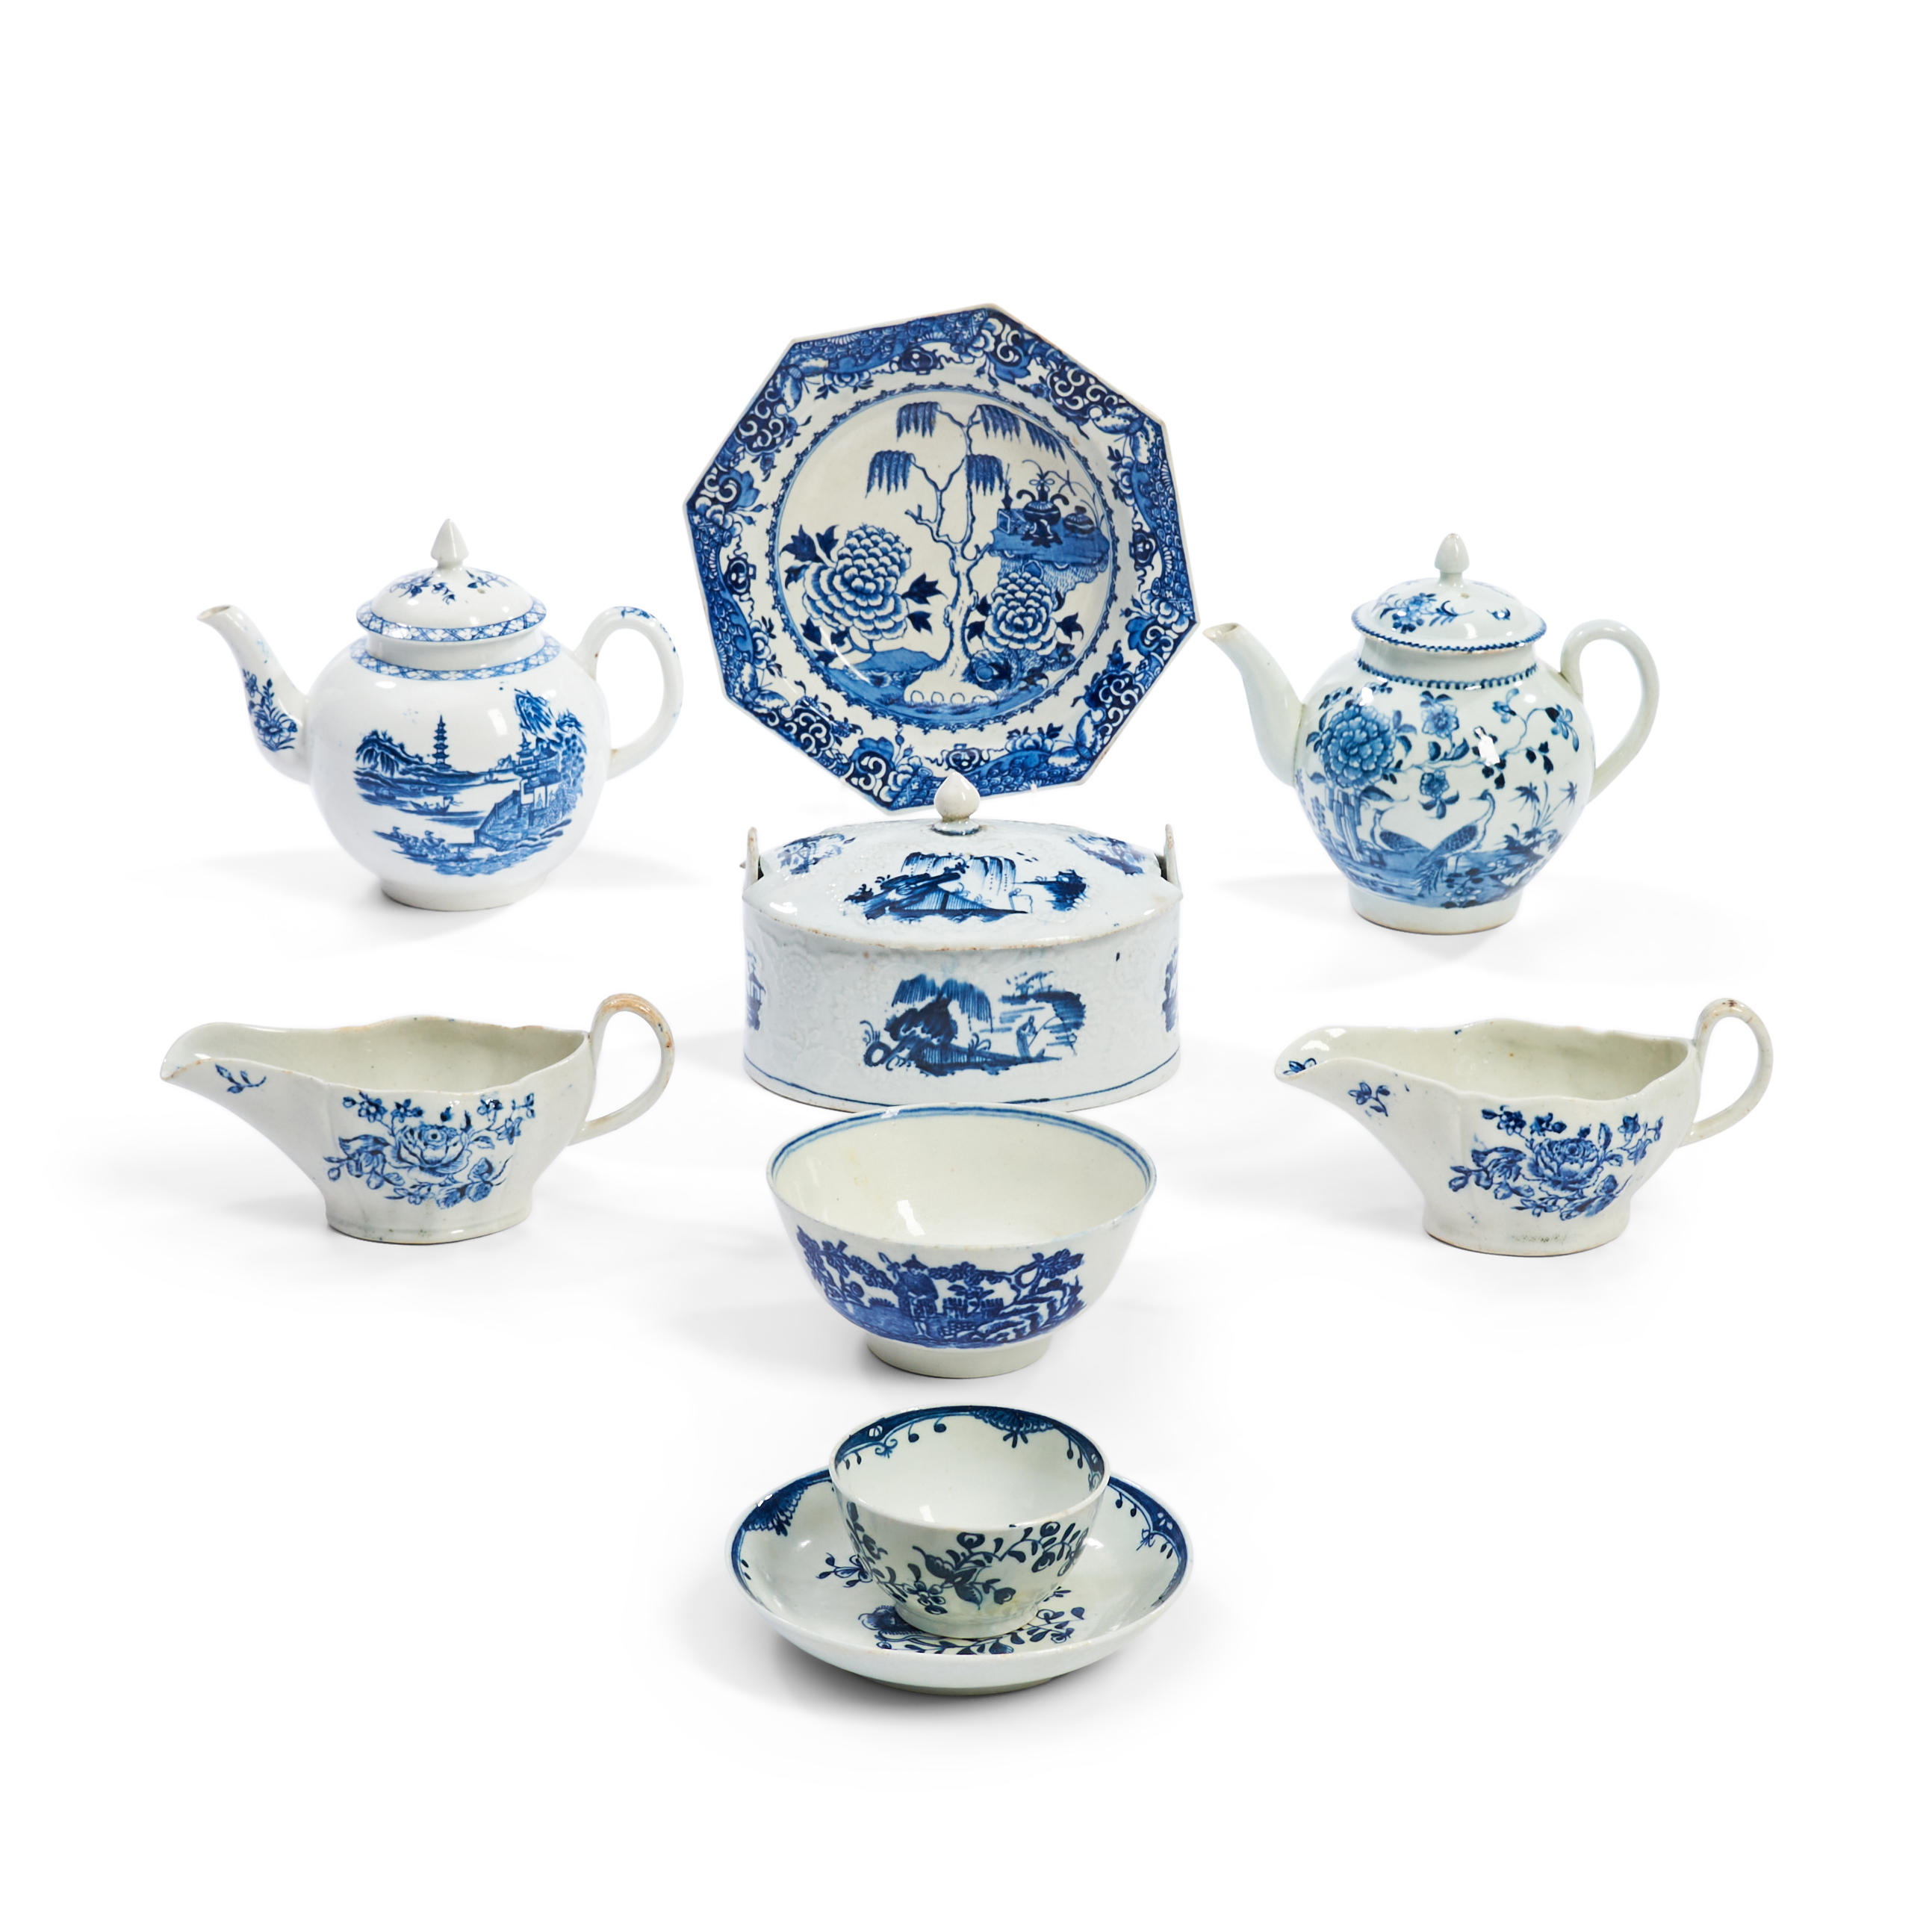 EIGHT ENGLISH BLUE AND WHITE PORCELAIN